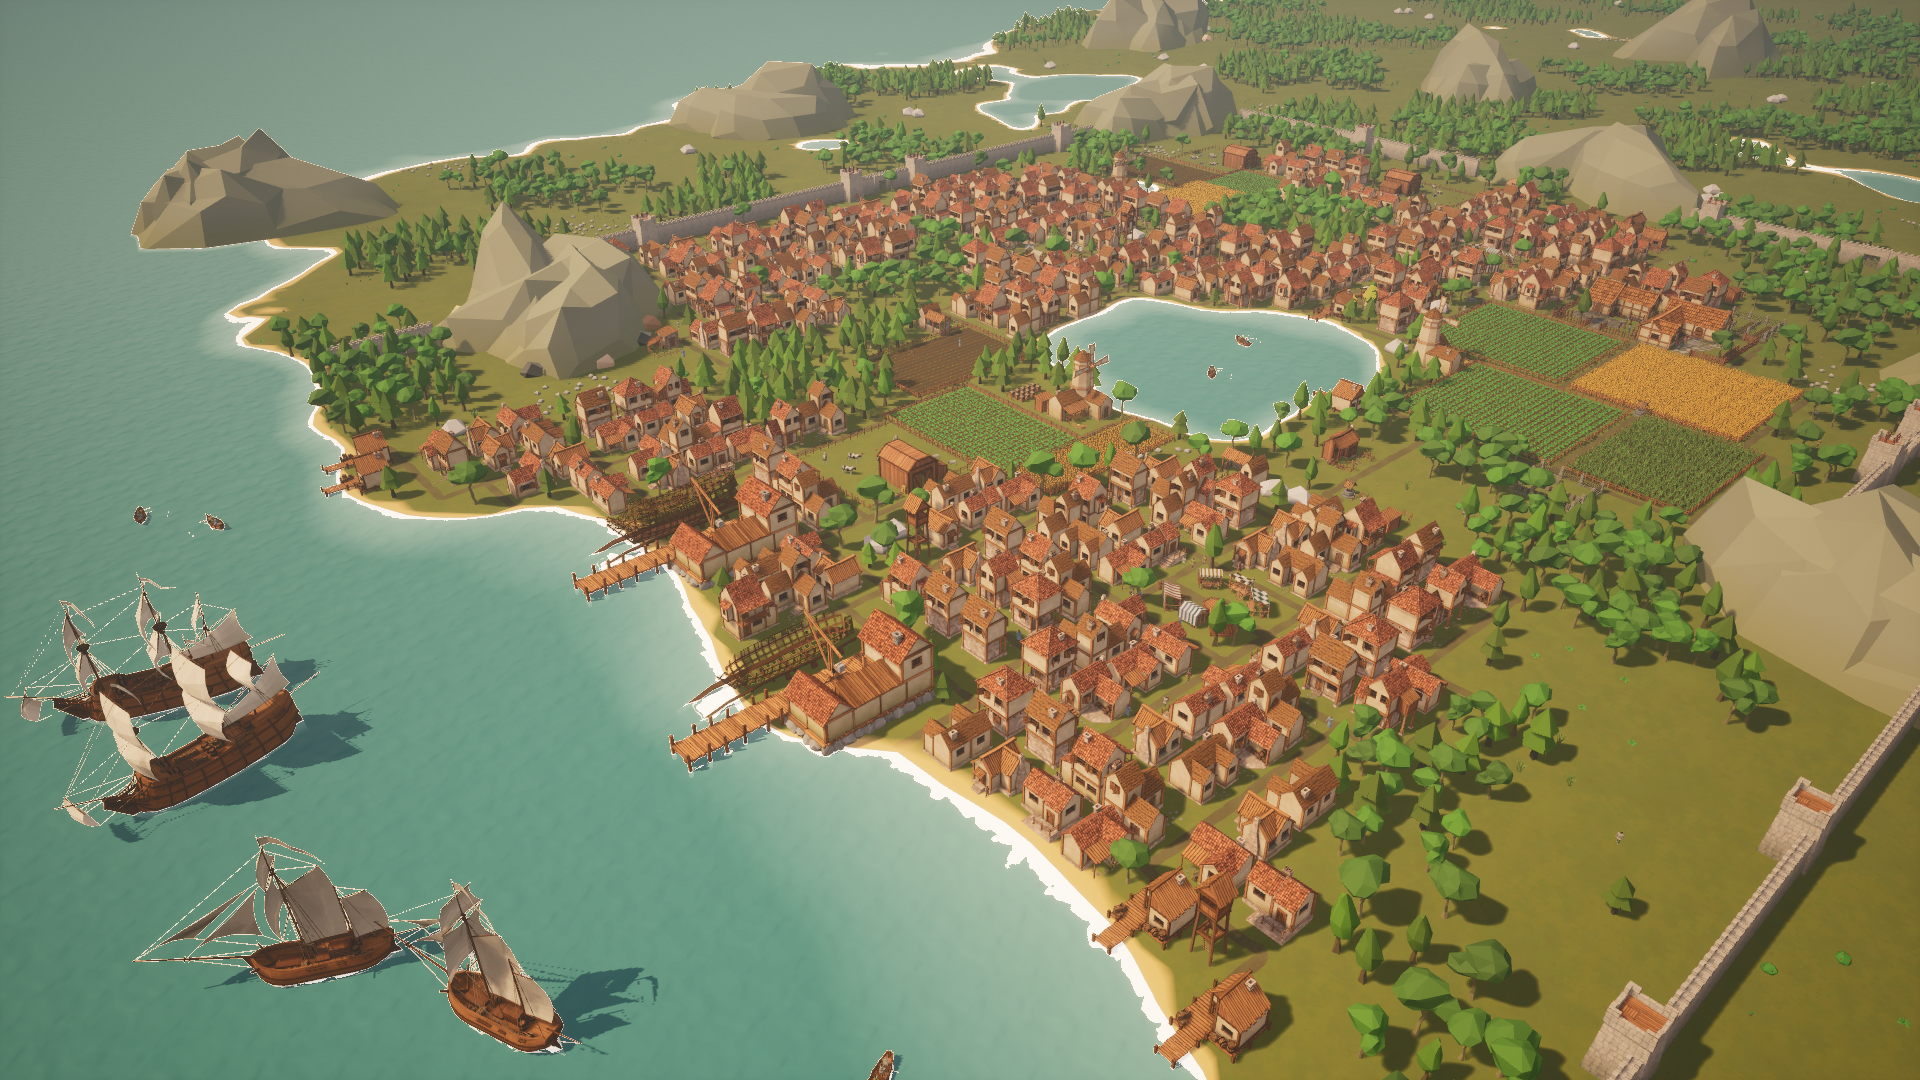 I’m developing a sport impressed by Banished: Settlements Rising